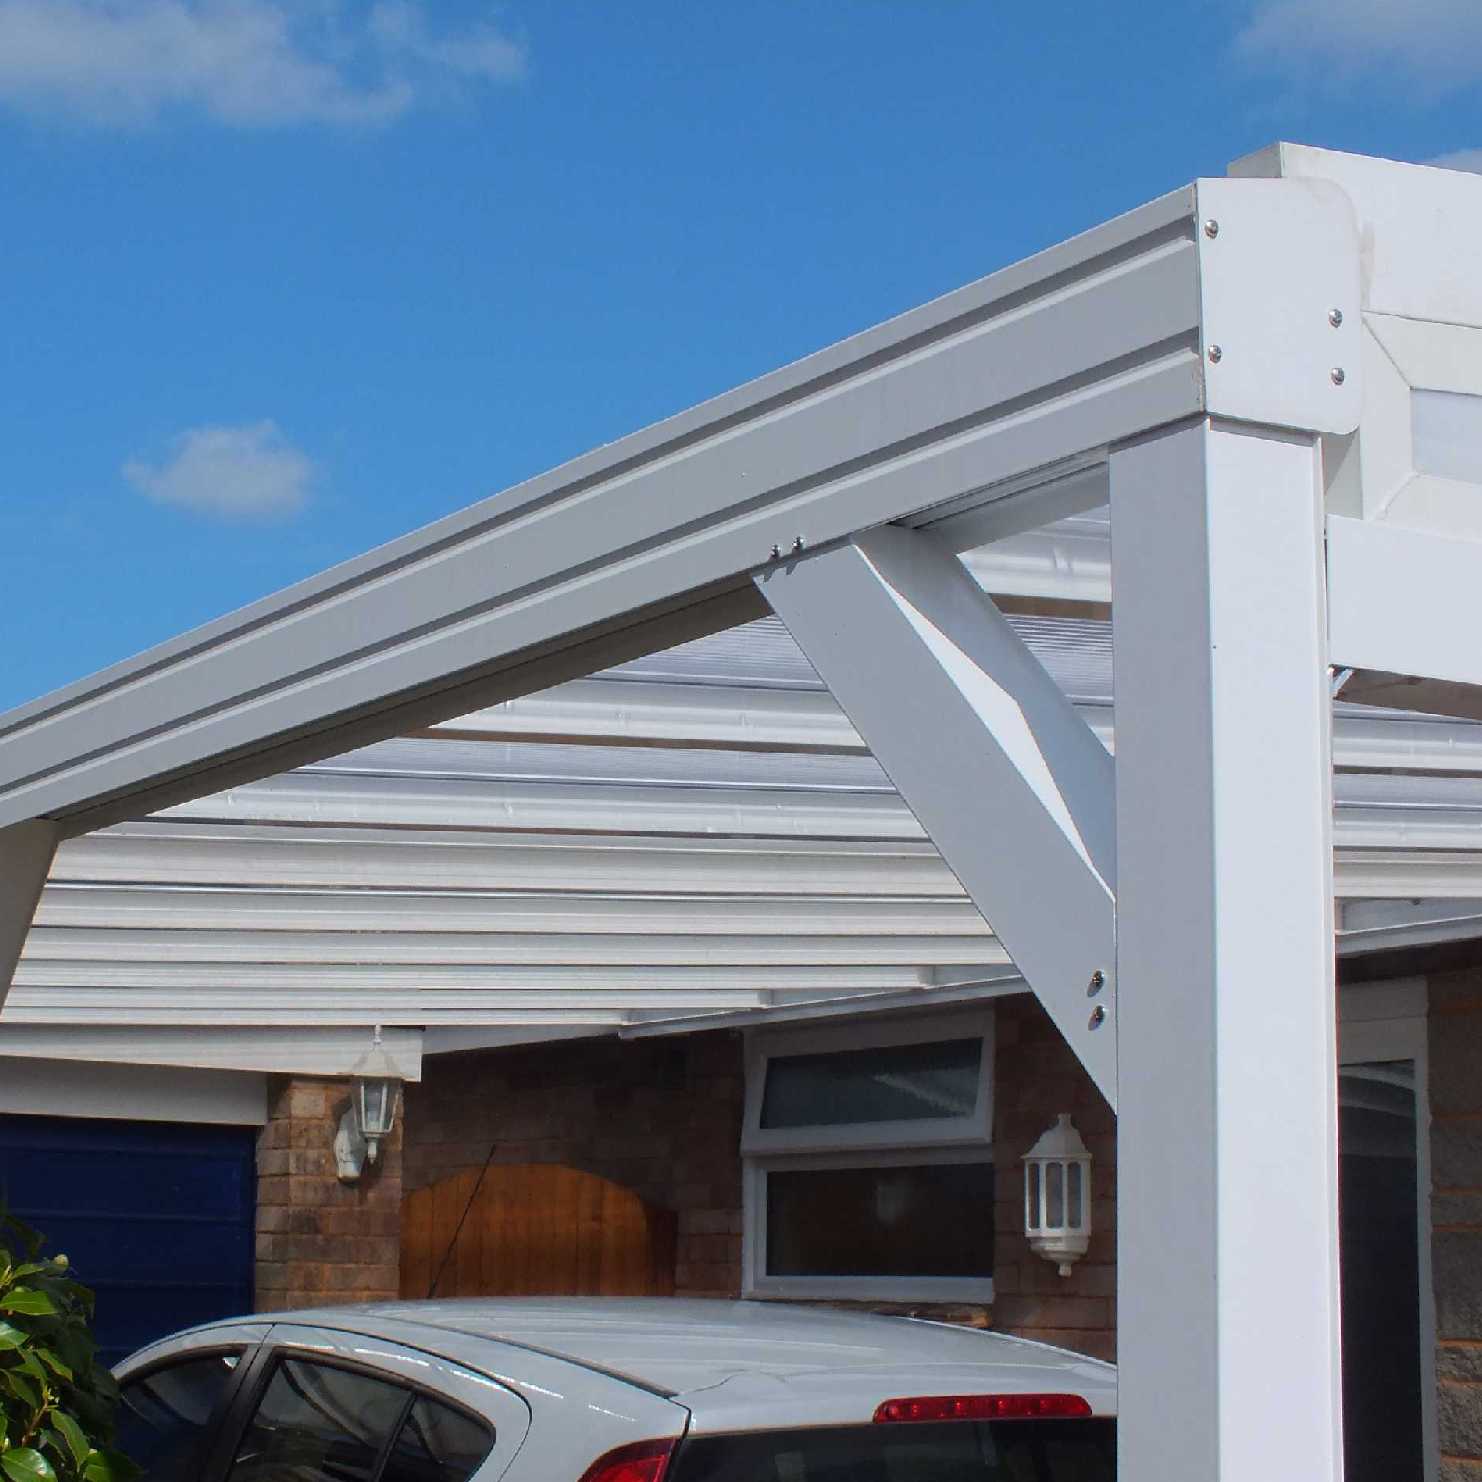 Great deals on Omega Smart Lean-To Canopy, White with 16mm Polycarbonate Glazing - 6.0m (W) x 3.0m (P), (3) Supporting Posts